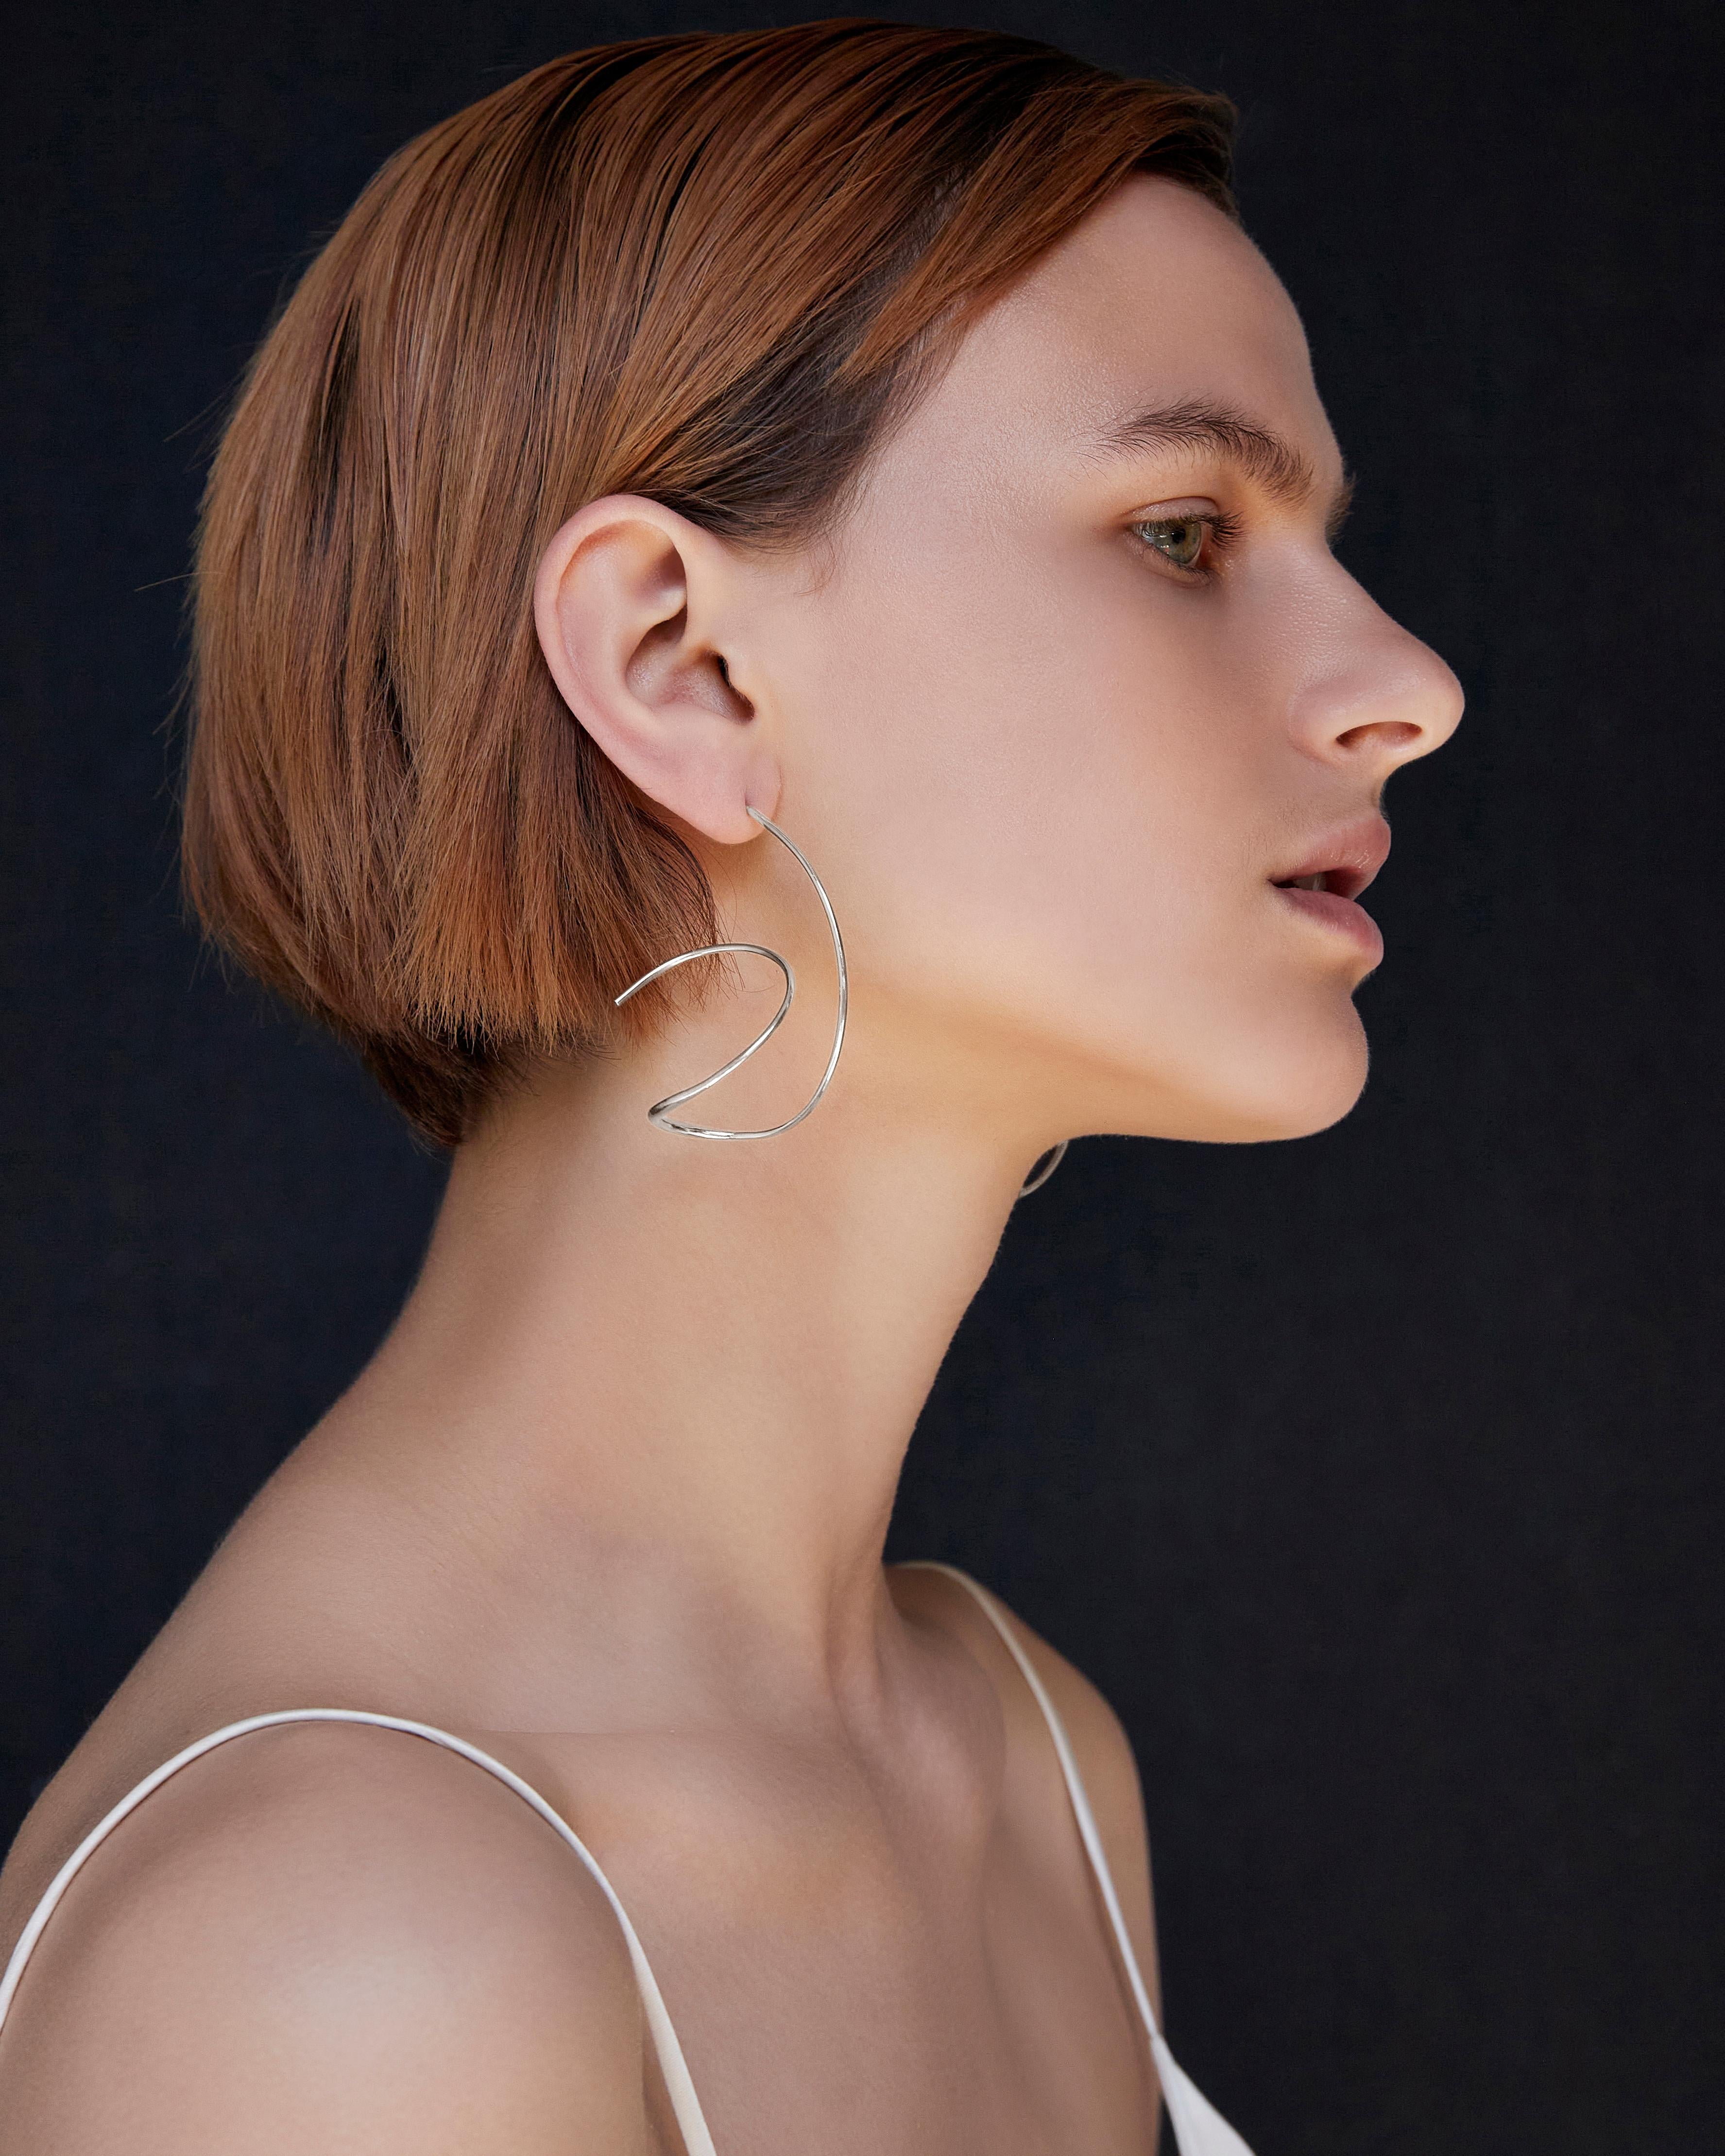 BAR Jewellery, London UK, RIVERA EARRINGS, Sterling Silver 

Inspired by the sculptor Jose De Rivera, the Rivera Earrings are lightweight, wearable sculptures. Best worn with the hair tied back away from the face to highlight the sculptural